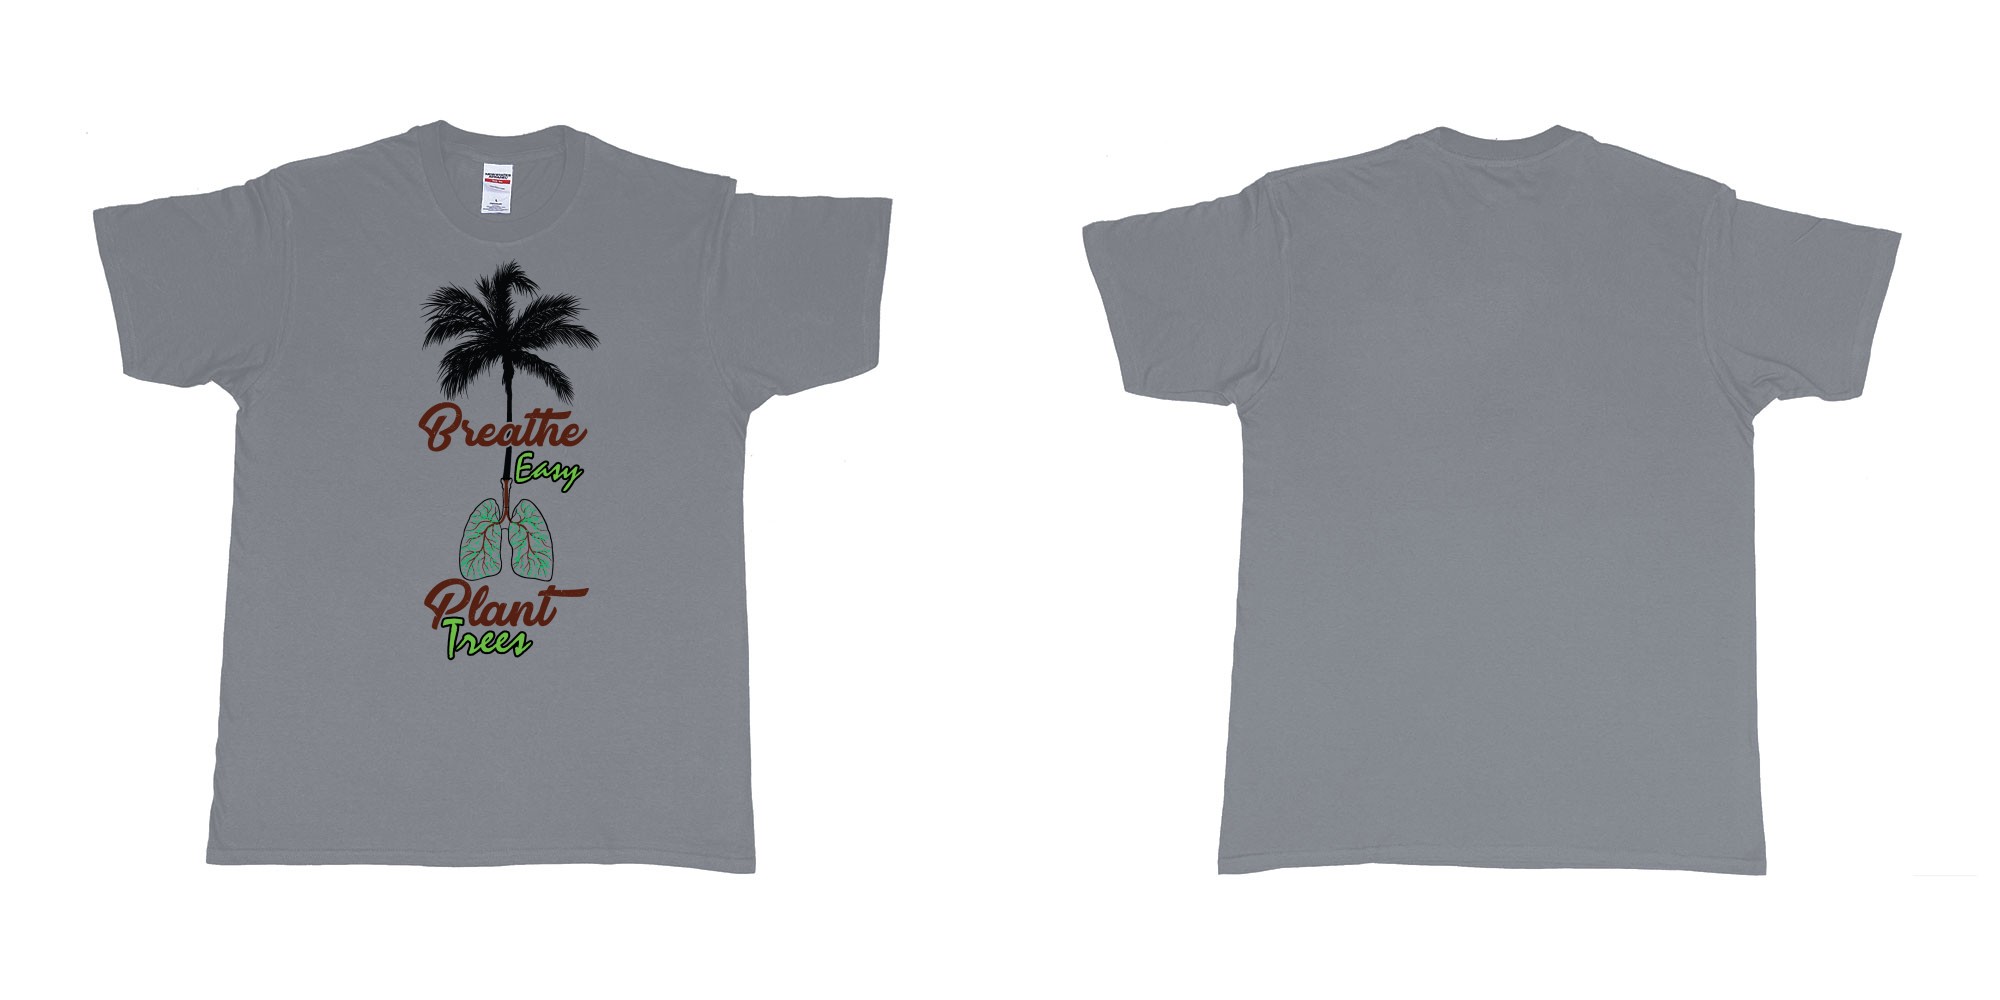 Custom tshirt design breathe easy and plant a tree for better air for everyone in fabric color misty choice your own text made in Bali by The Pirate Way